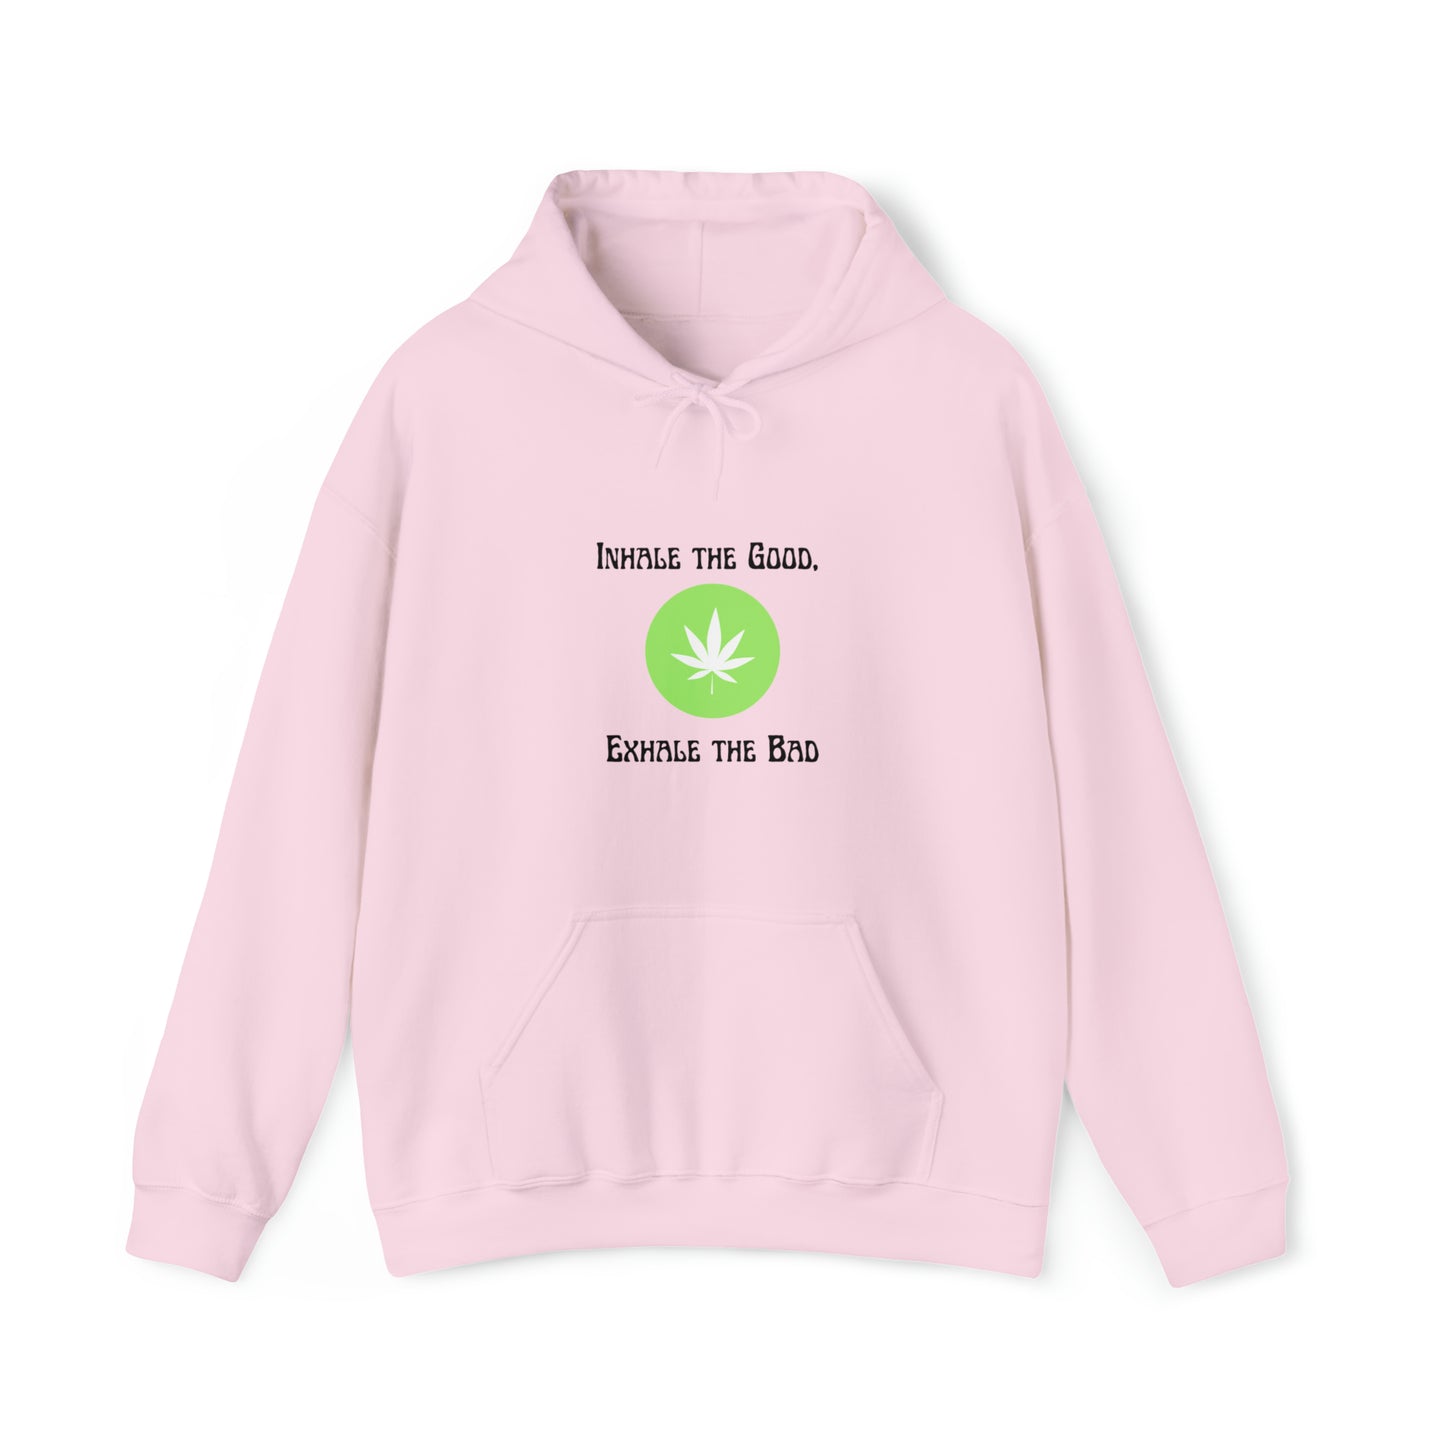 Inhale the Good, Exhale the Bad  - Unisex